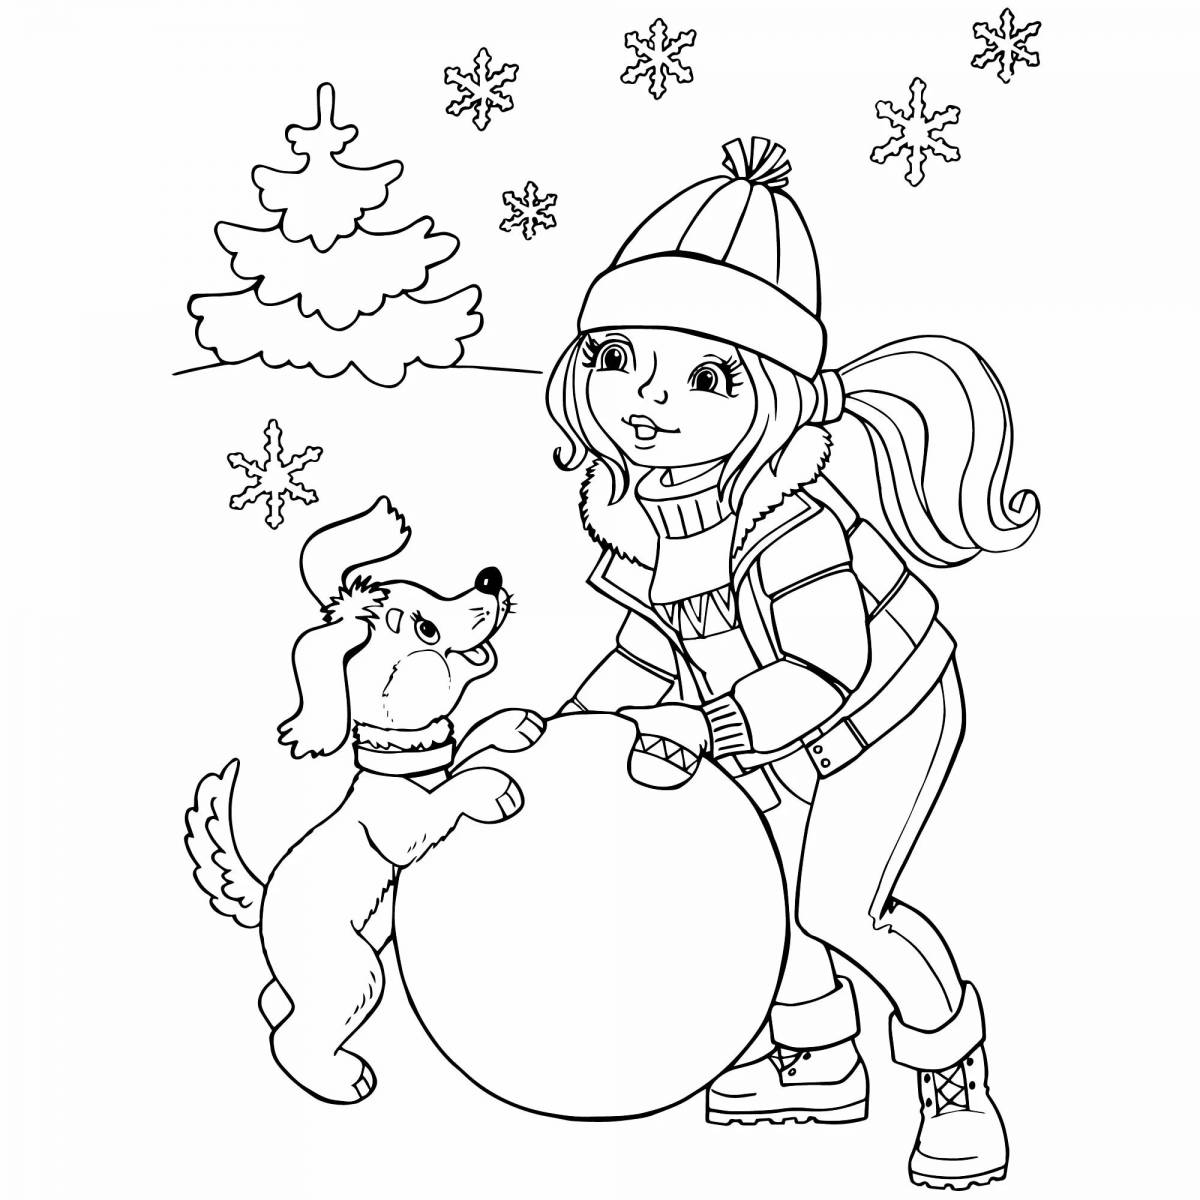 Fascinating Christmas coloring book for girls 8 years old